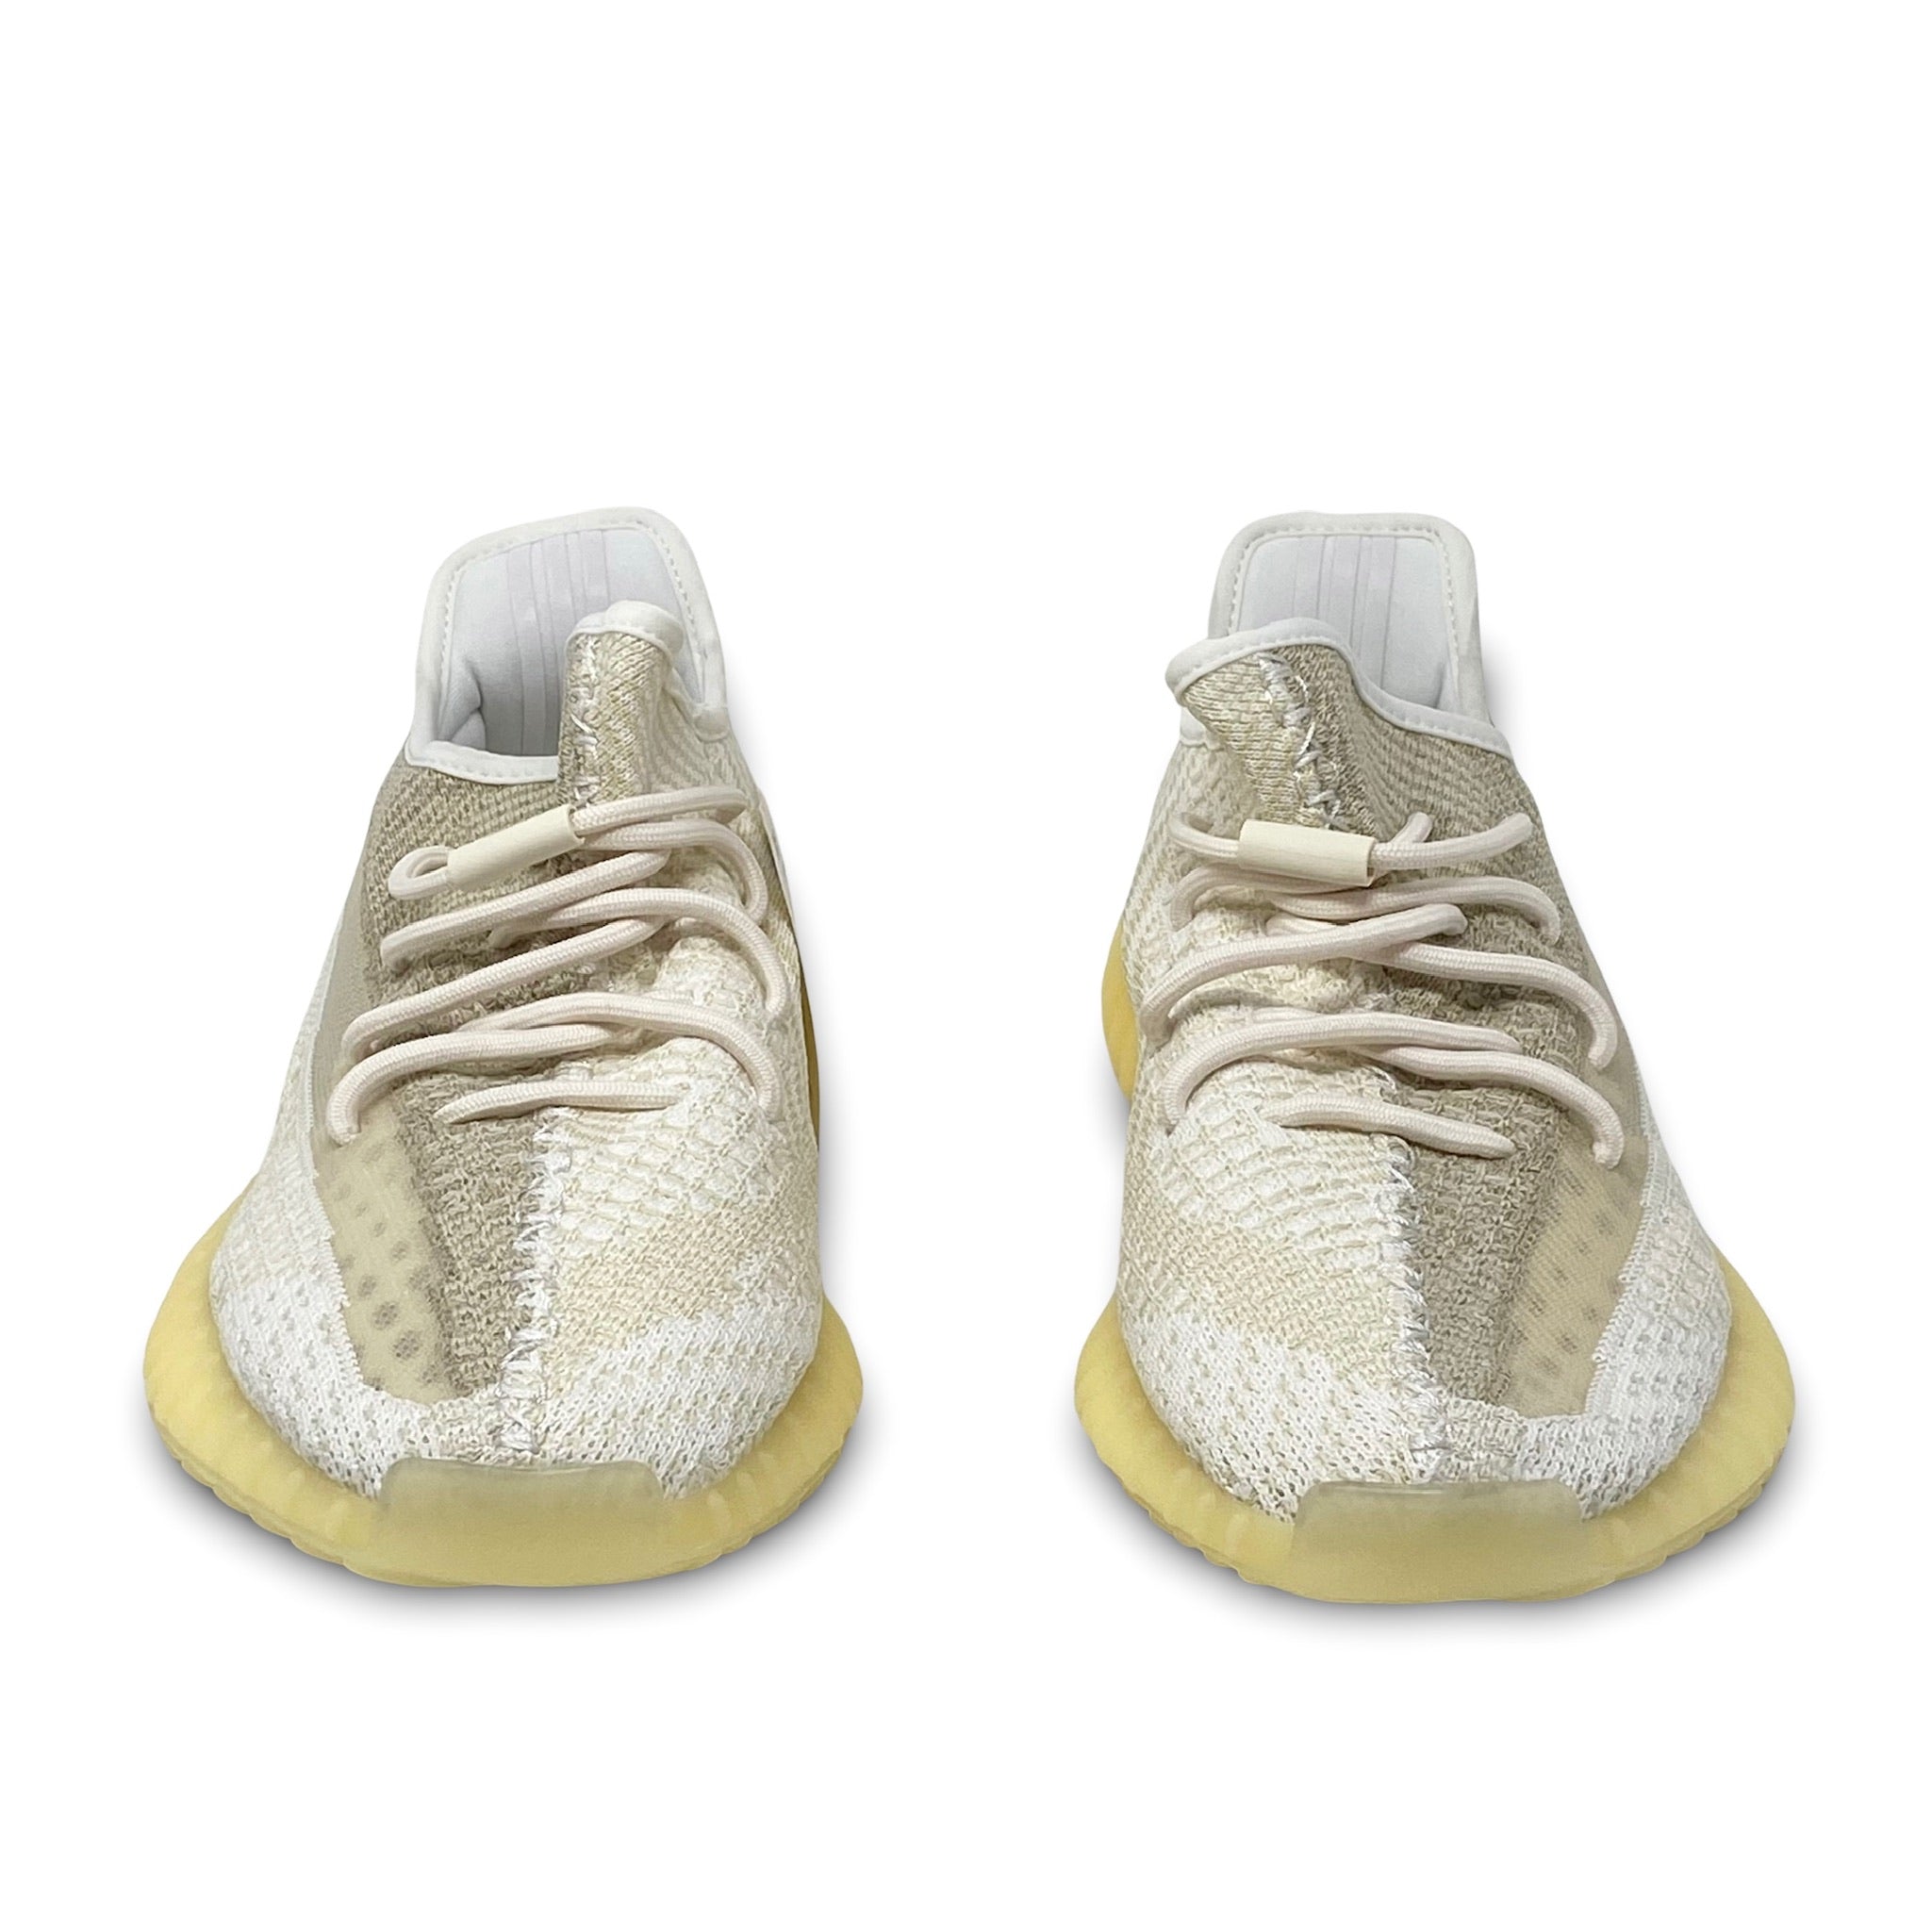 Yeezy Boost 350 V2 Natural Sneakers 9.5